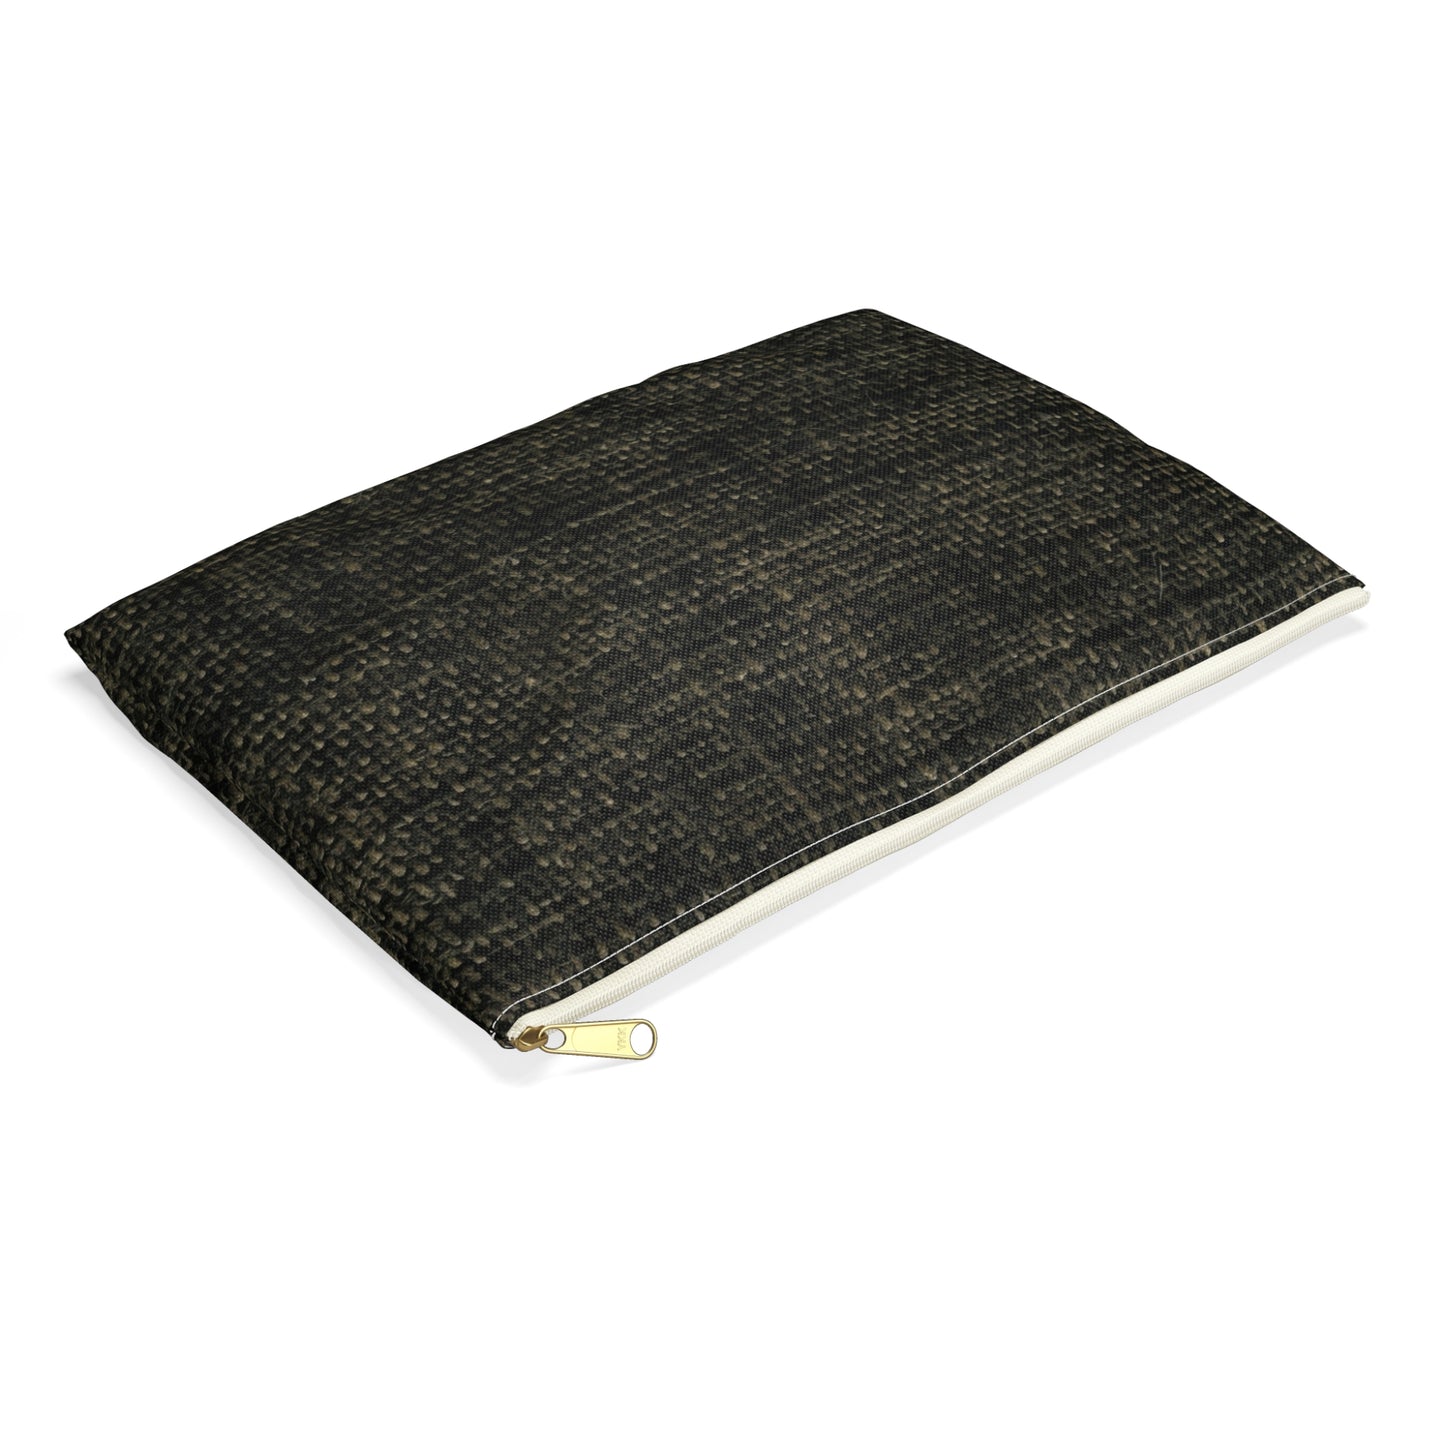 Sophisticated Seamless Texture - Black Denim-Inspired Fabric - Accessory Pouch